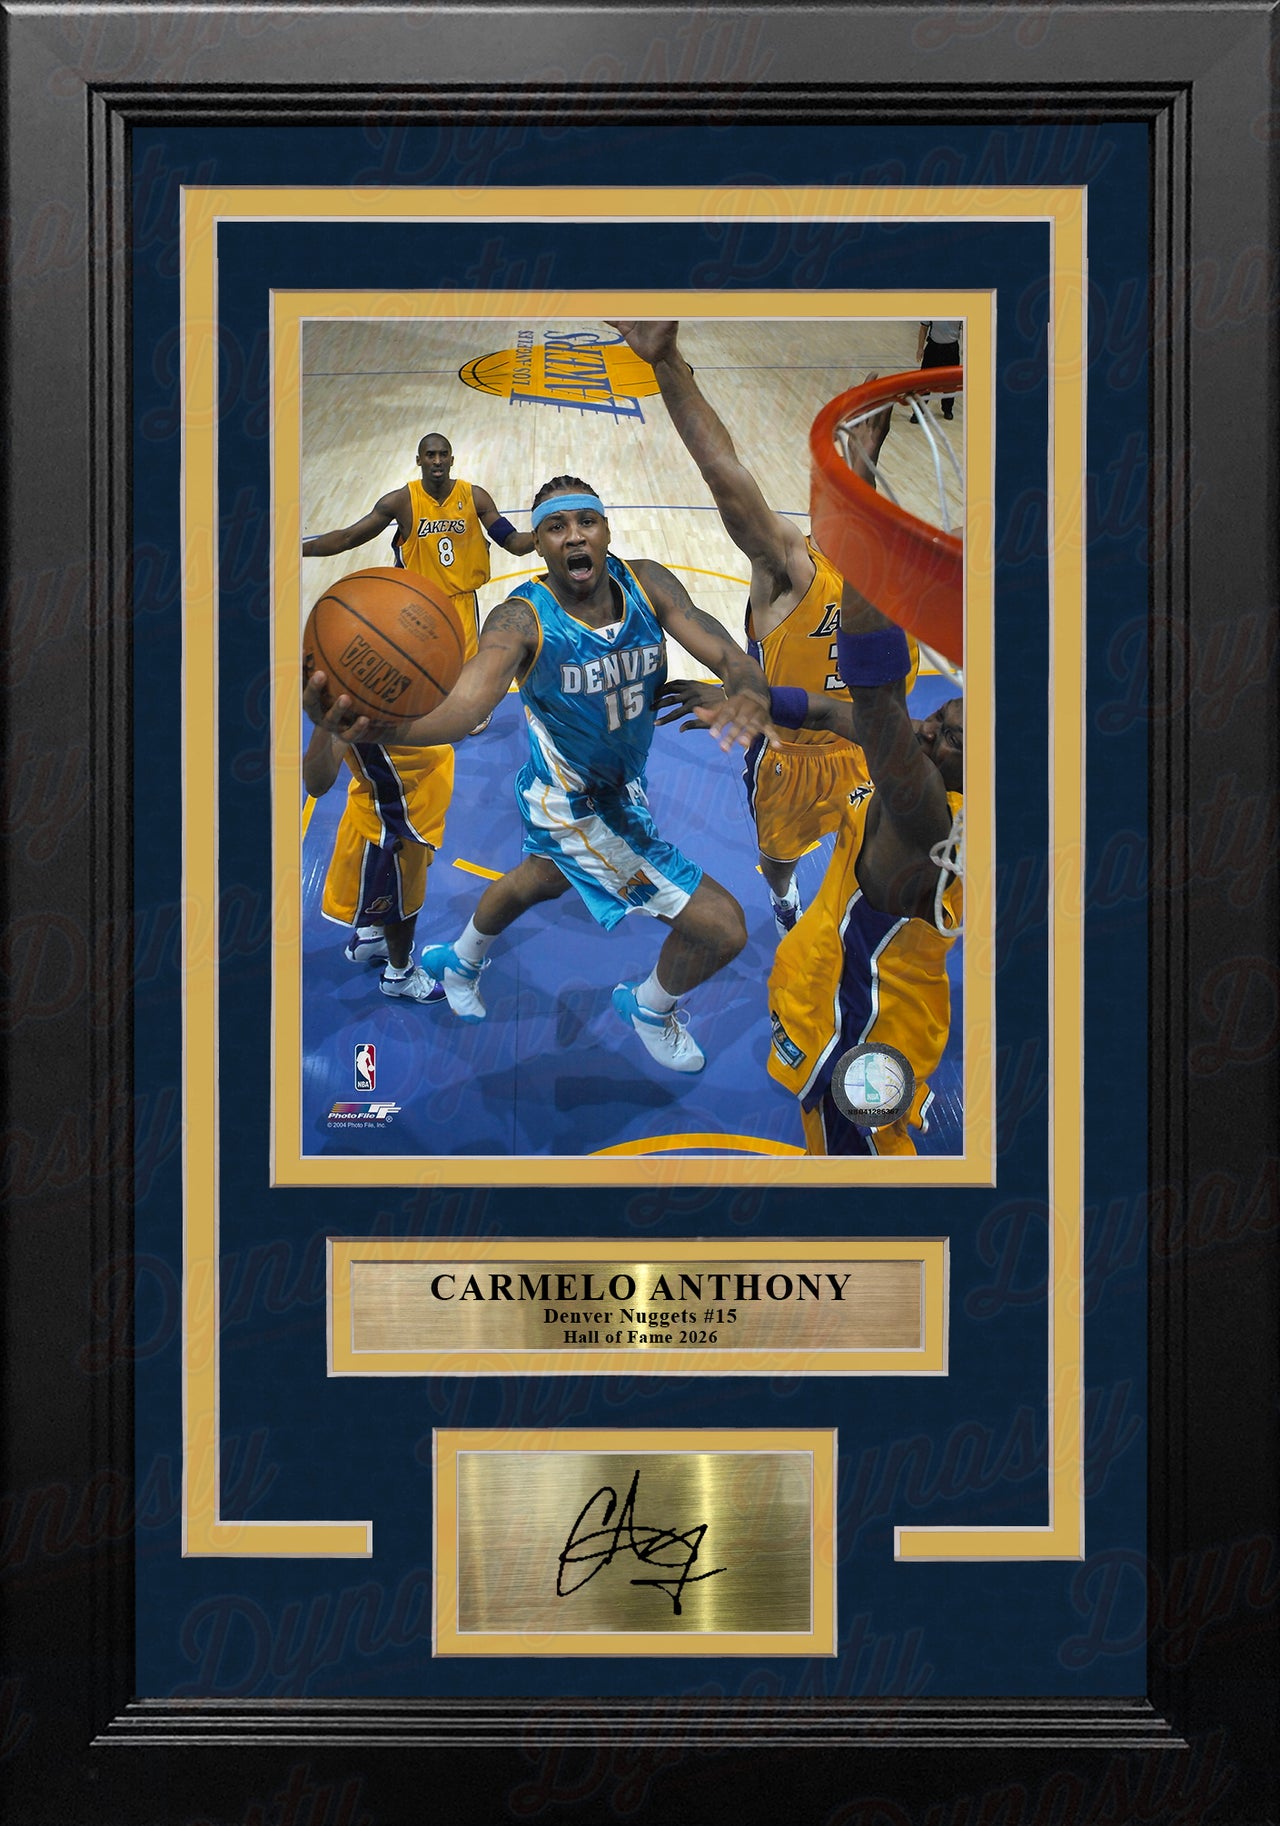 Carmelo Anthony Rim Cam Denver Nuggets 8x10 Framed Basketball Photo with Engraved Autograph - Dynasty Sports & Framing 